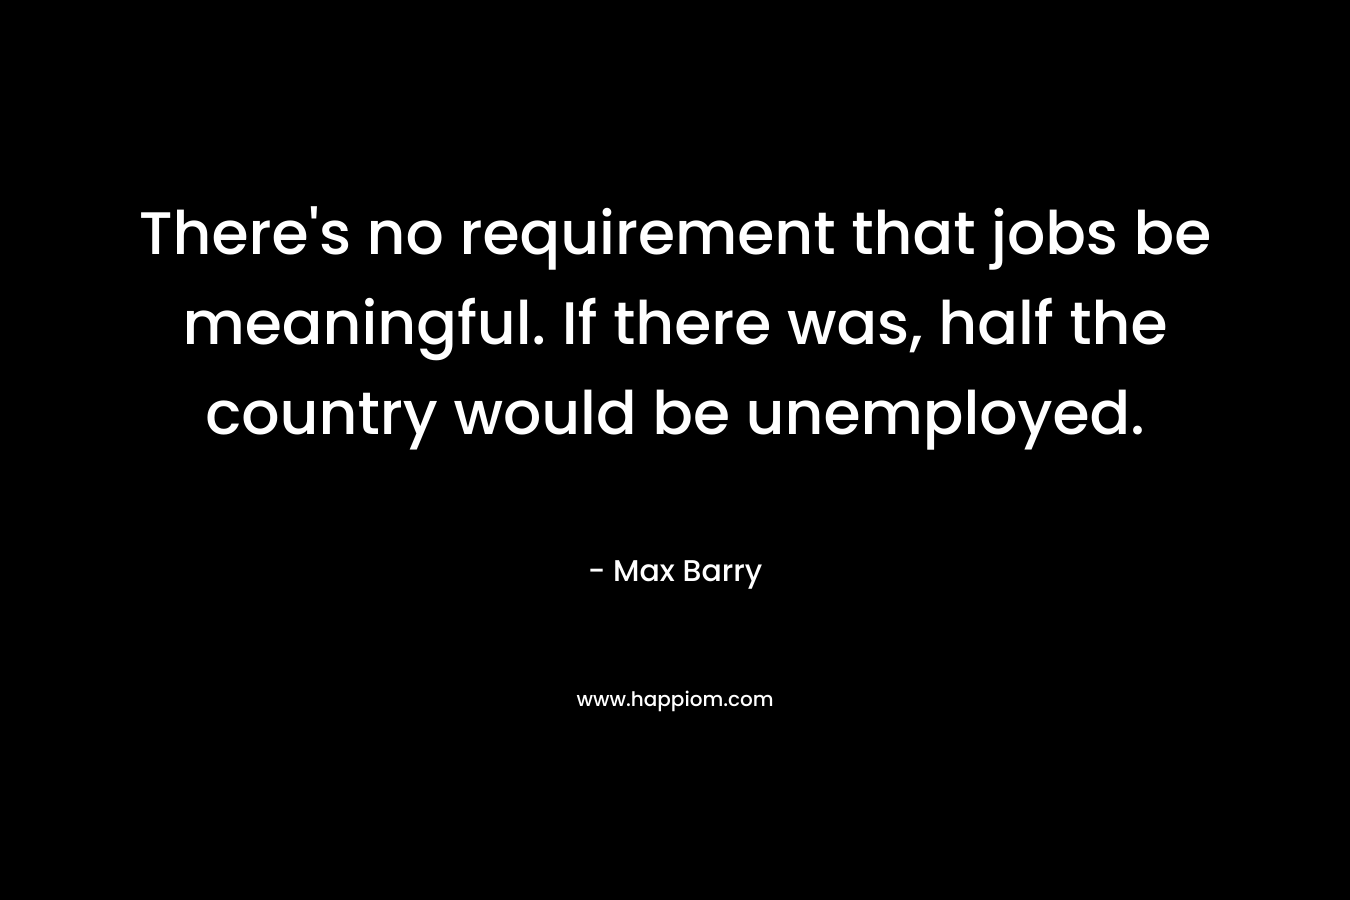 There's no requirement that jobs be meaningful. If there was, half the country would be unemployed.